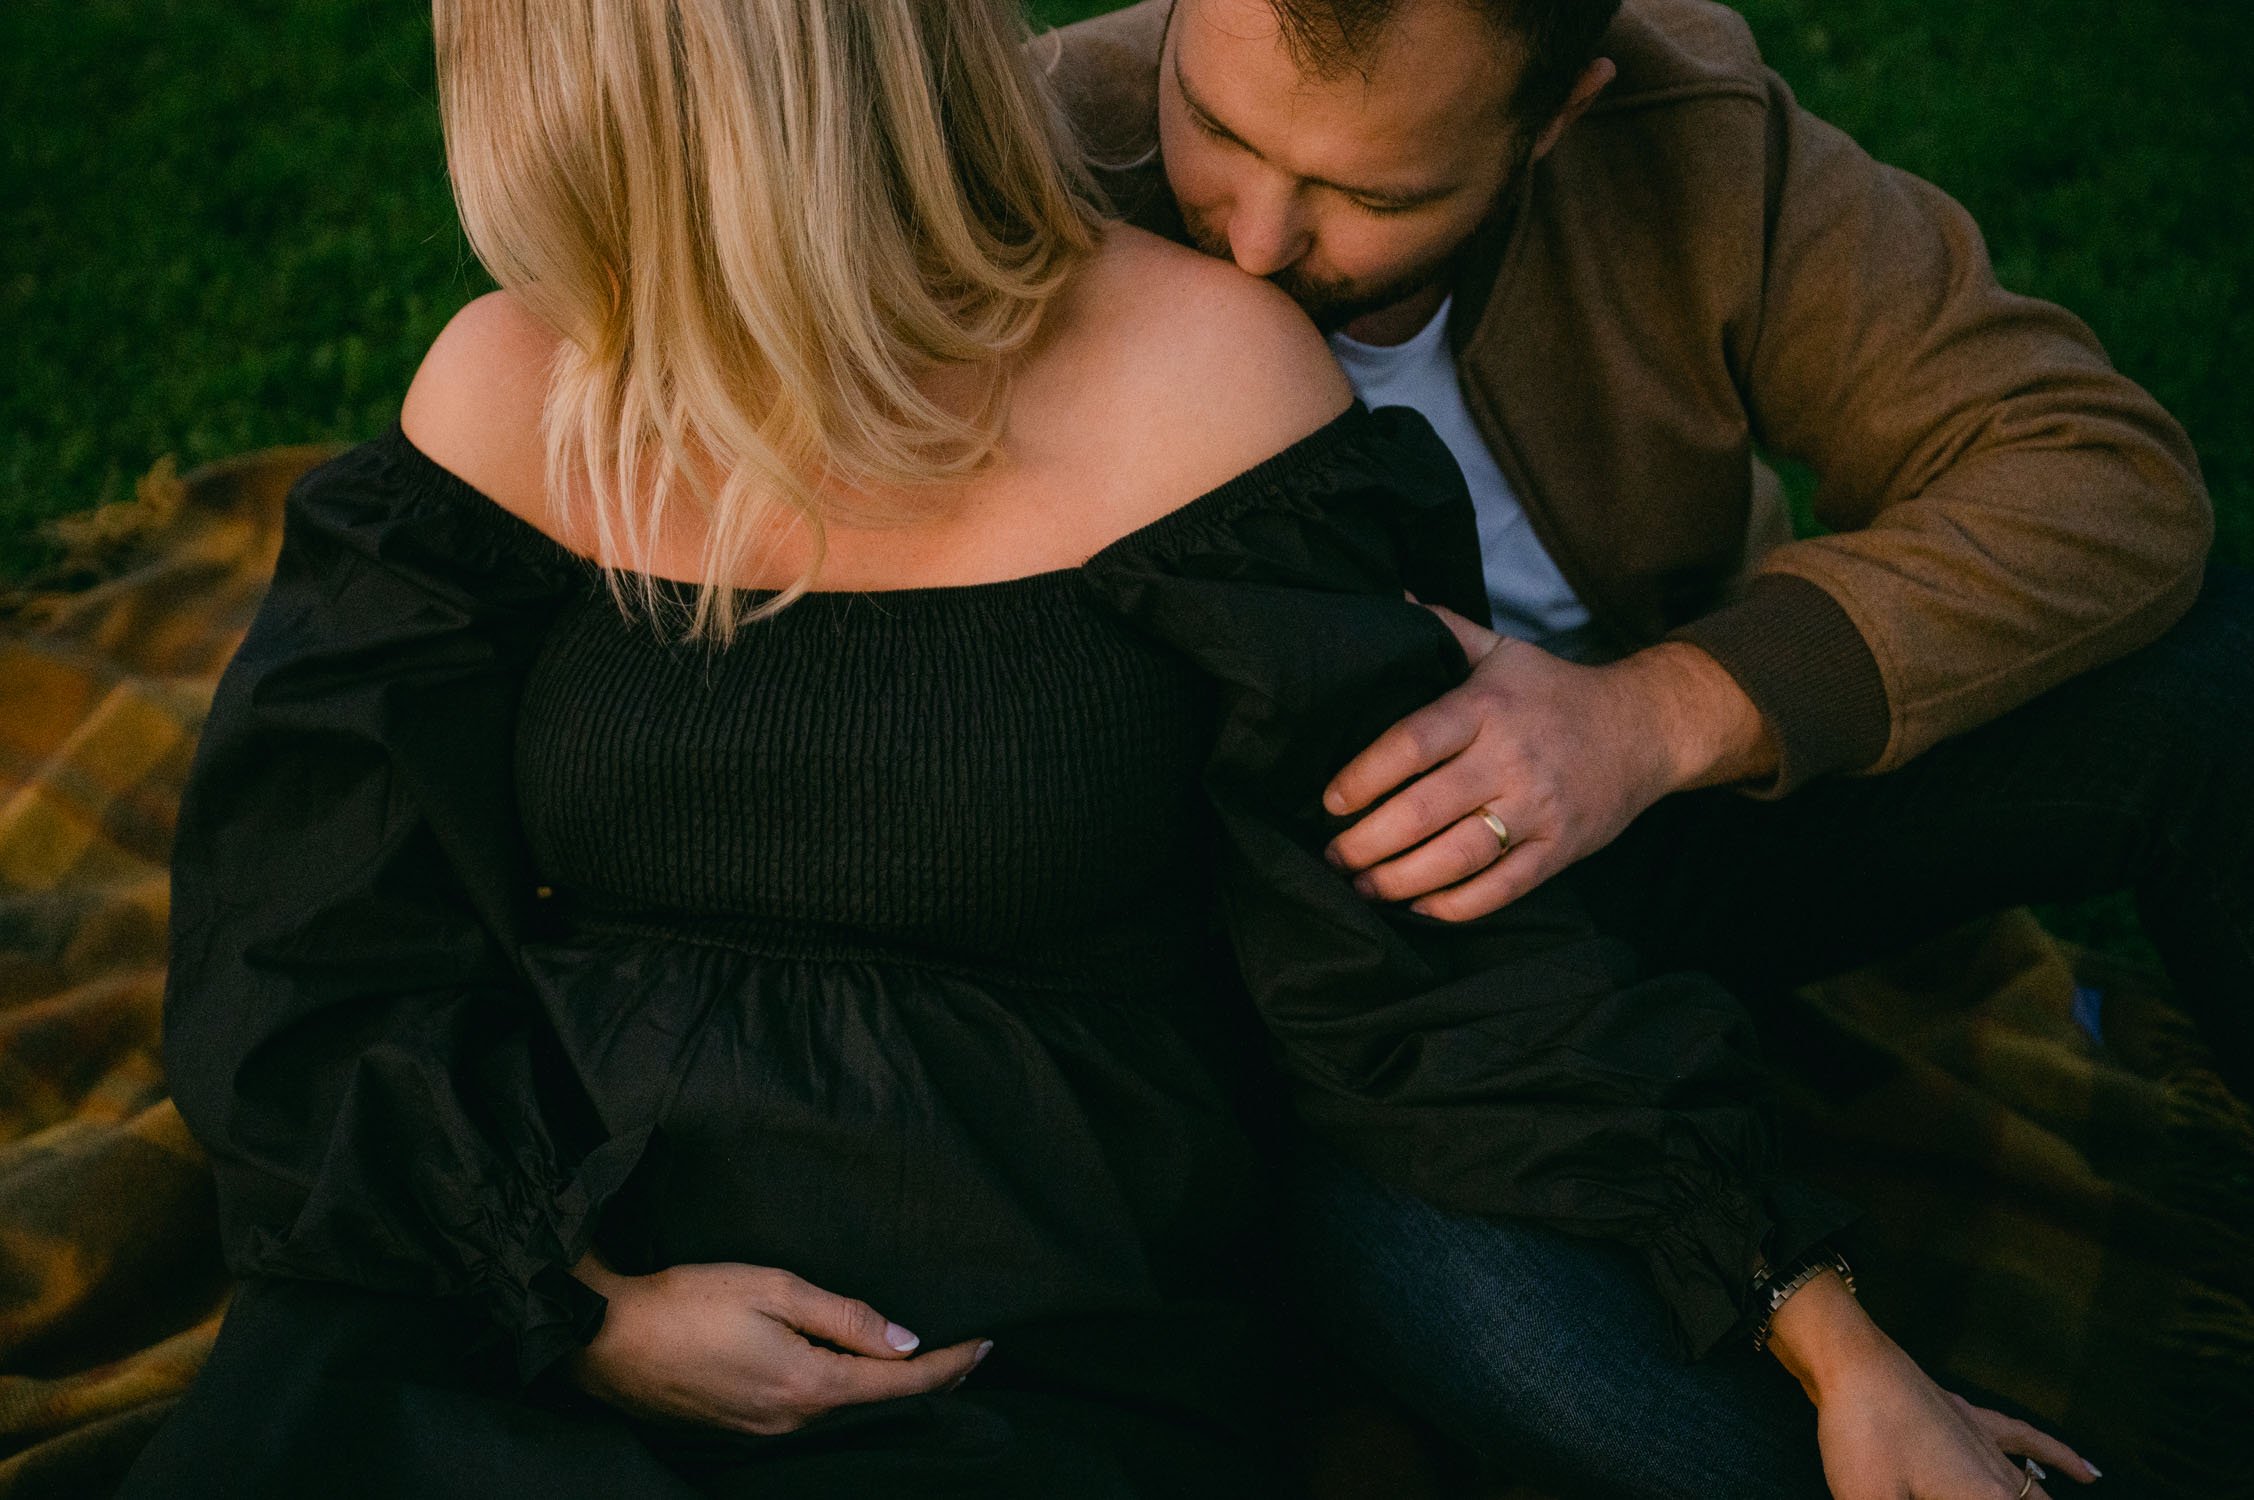  An urban san francisco maternity session, candid photo of couple during twilight hour